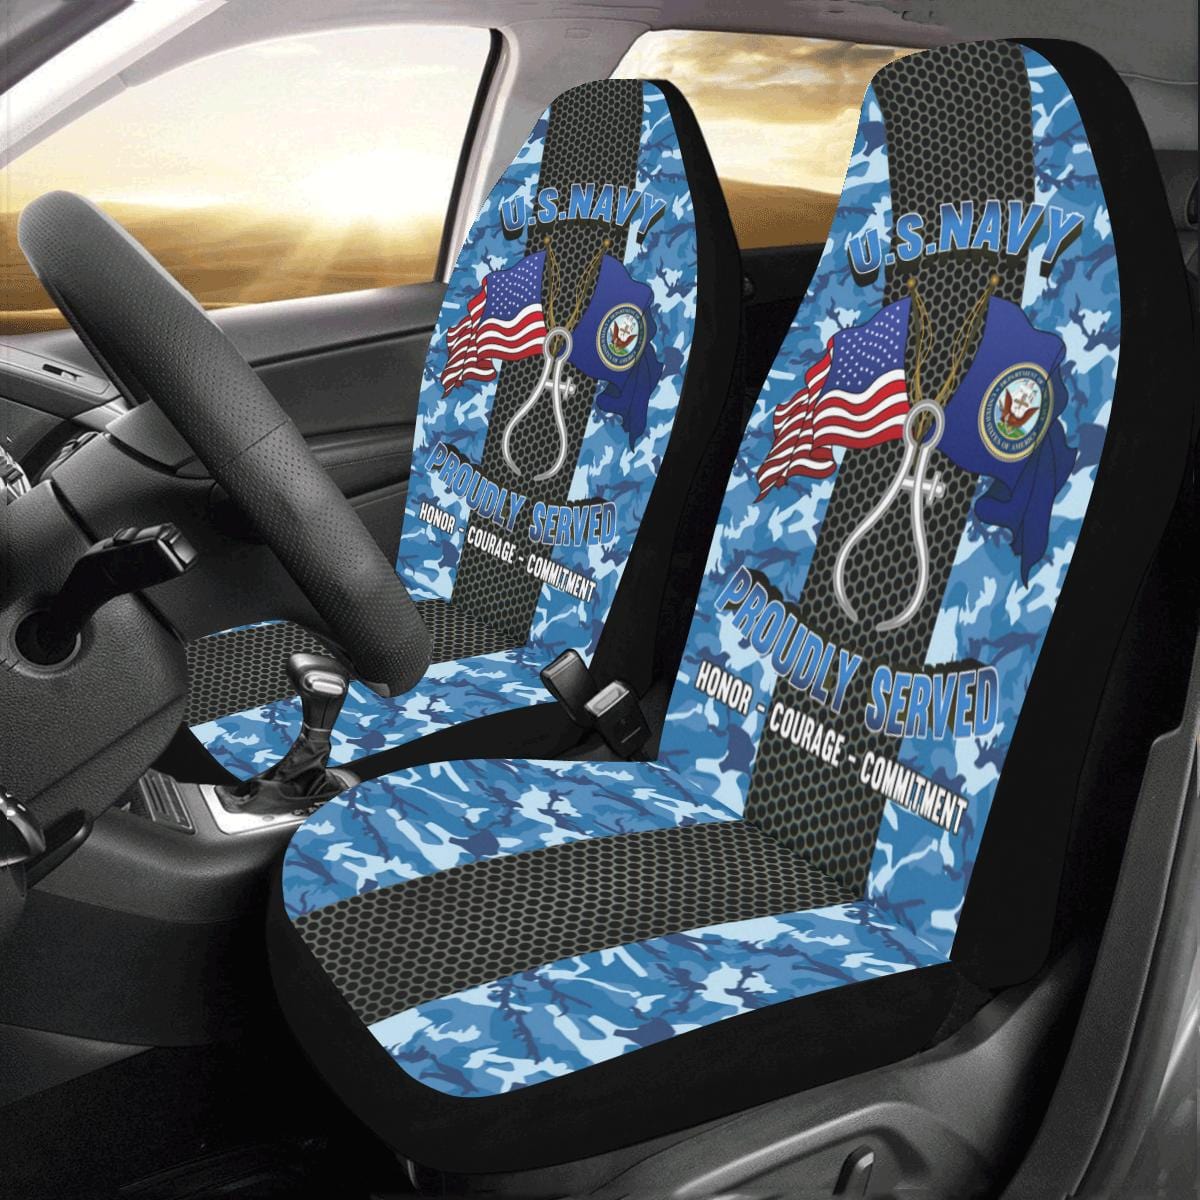 Navy Instrumentman Navy IM Car Seat Covers (Set of 2)-SeatCovers-Navy-Rate-Veterans Nation